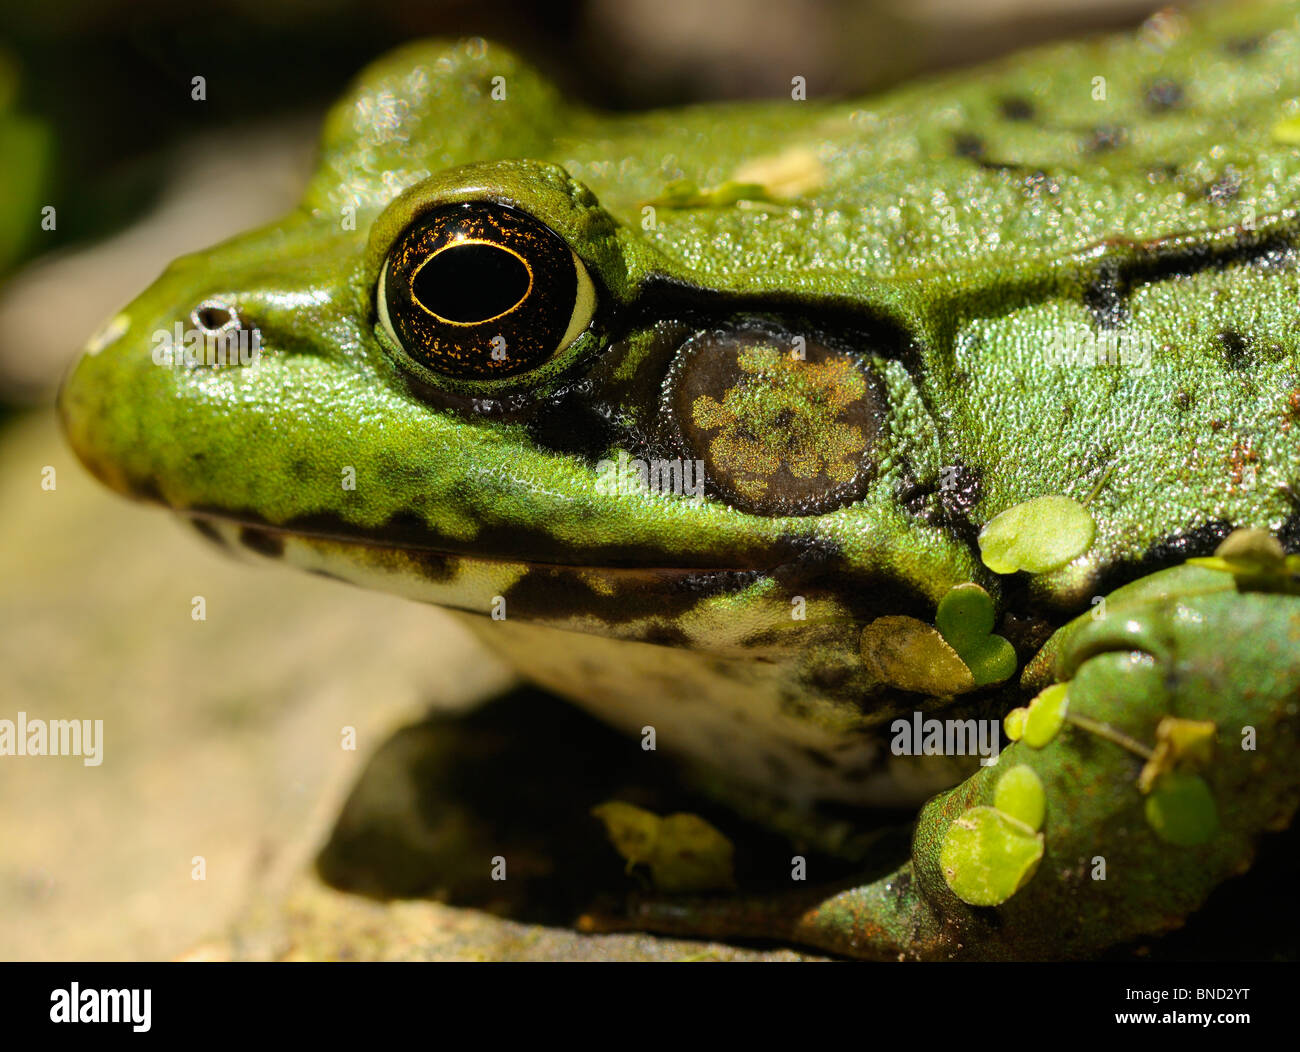 Close up of a female green frog Rana clamitans eye and tympanum stalking prey by a pond Stock Photo